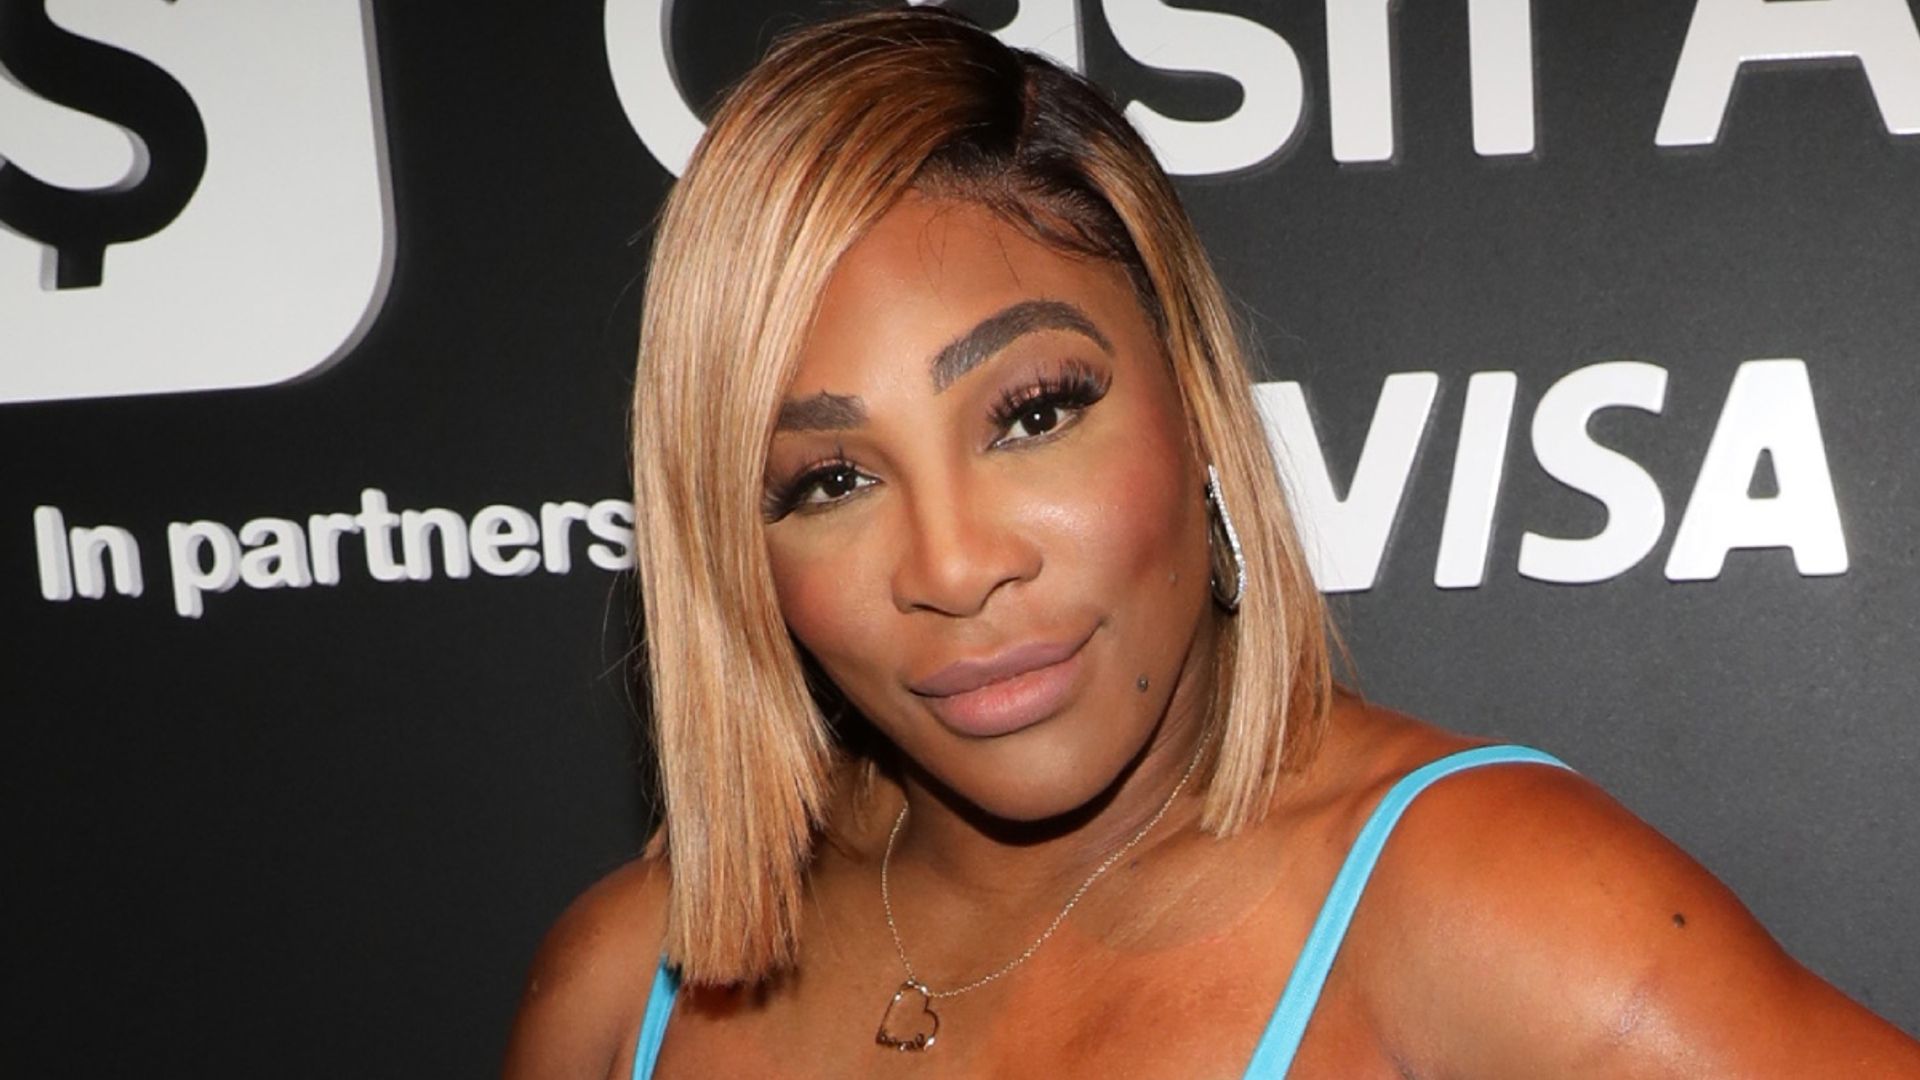 Serena Williams stuns as she poses in an electric blue dress